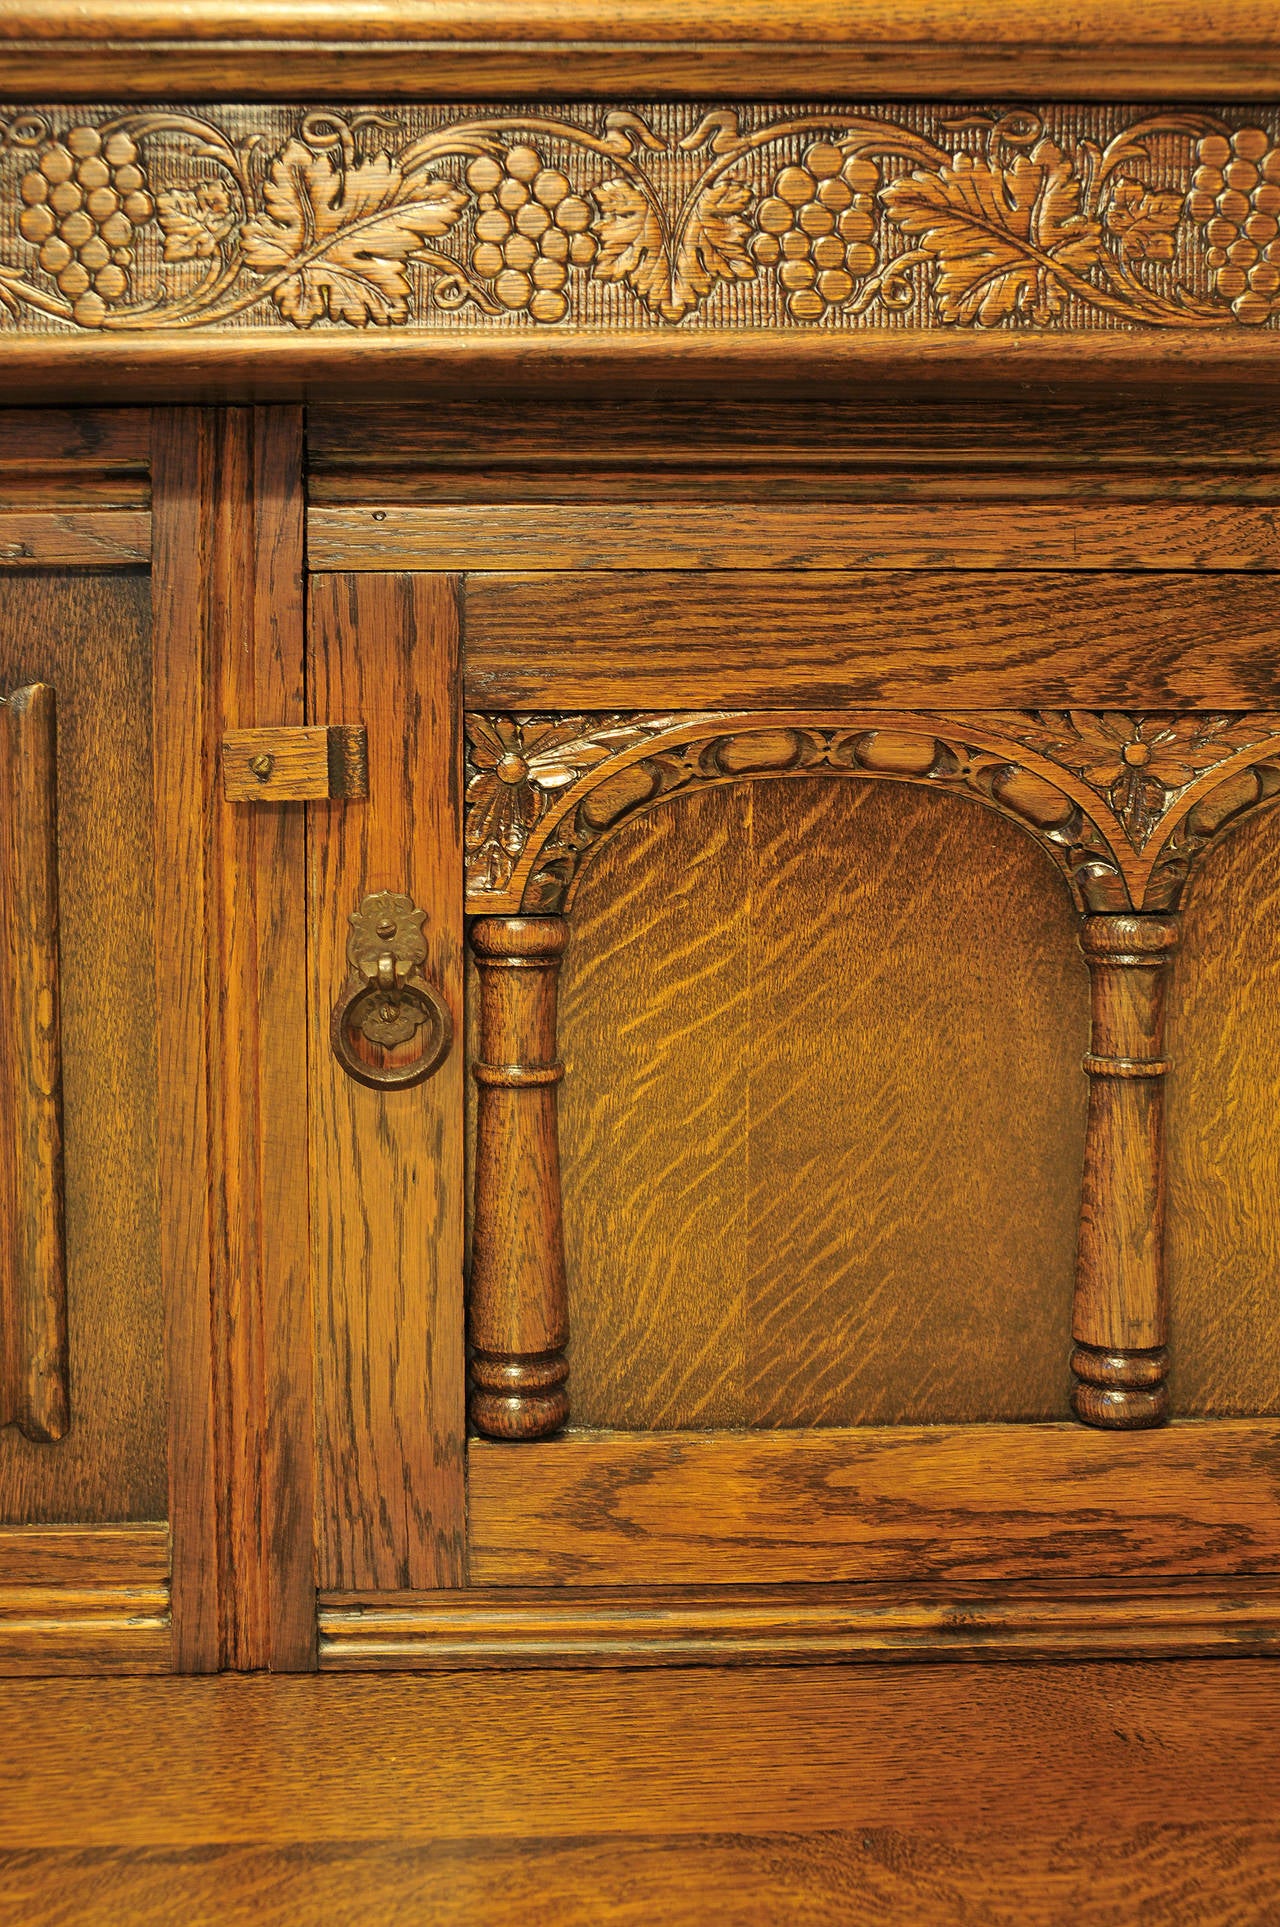 Step back top.

Carved upper door.

Two carved drawers. 

Two carved lower doors.

Linen fold panels made with beautiful tiger grain oak.